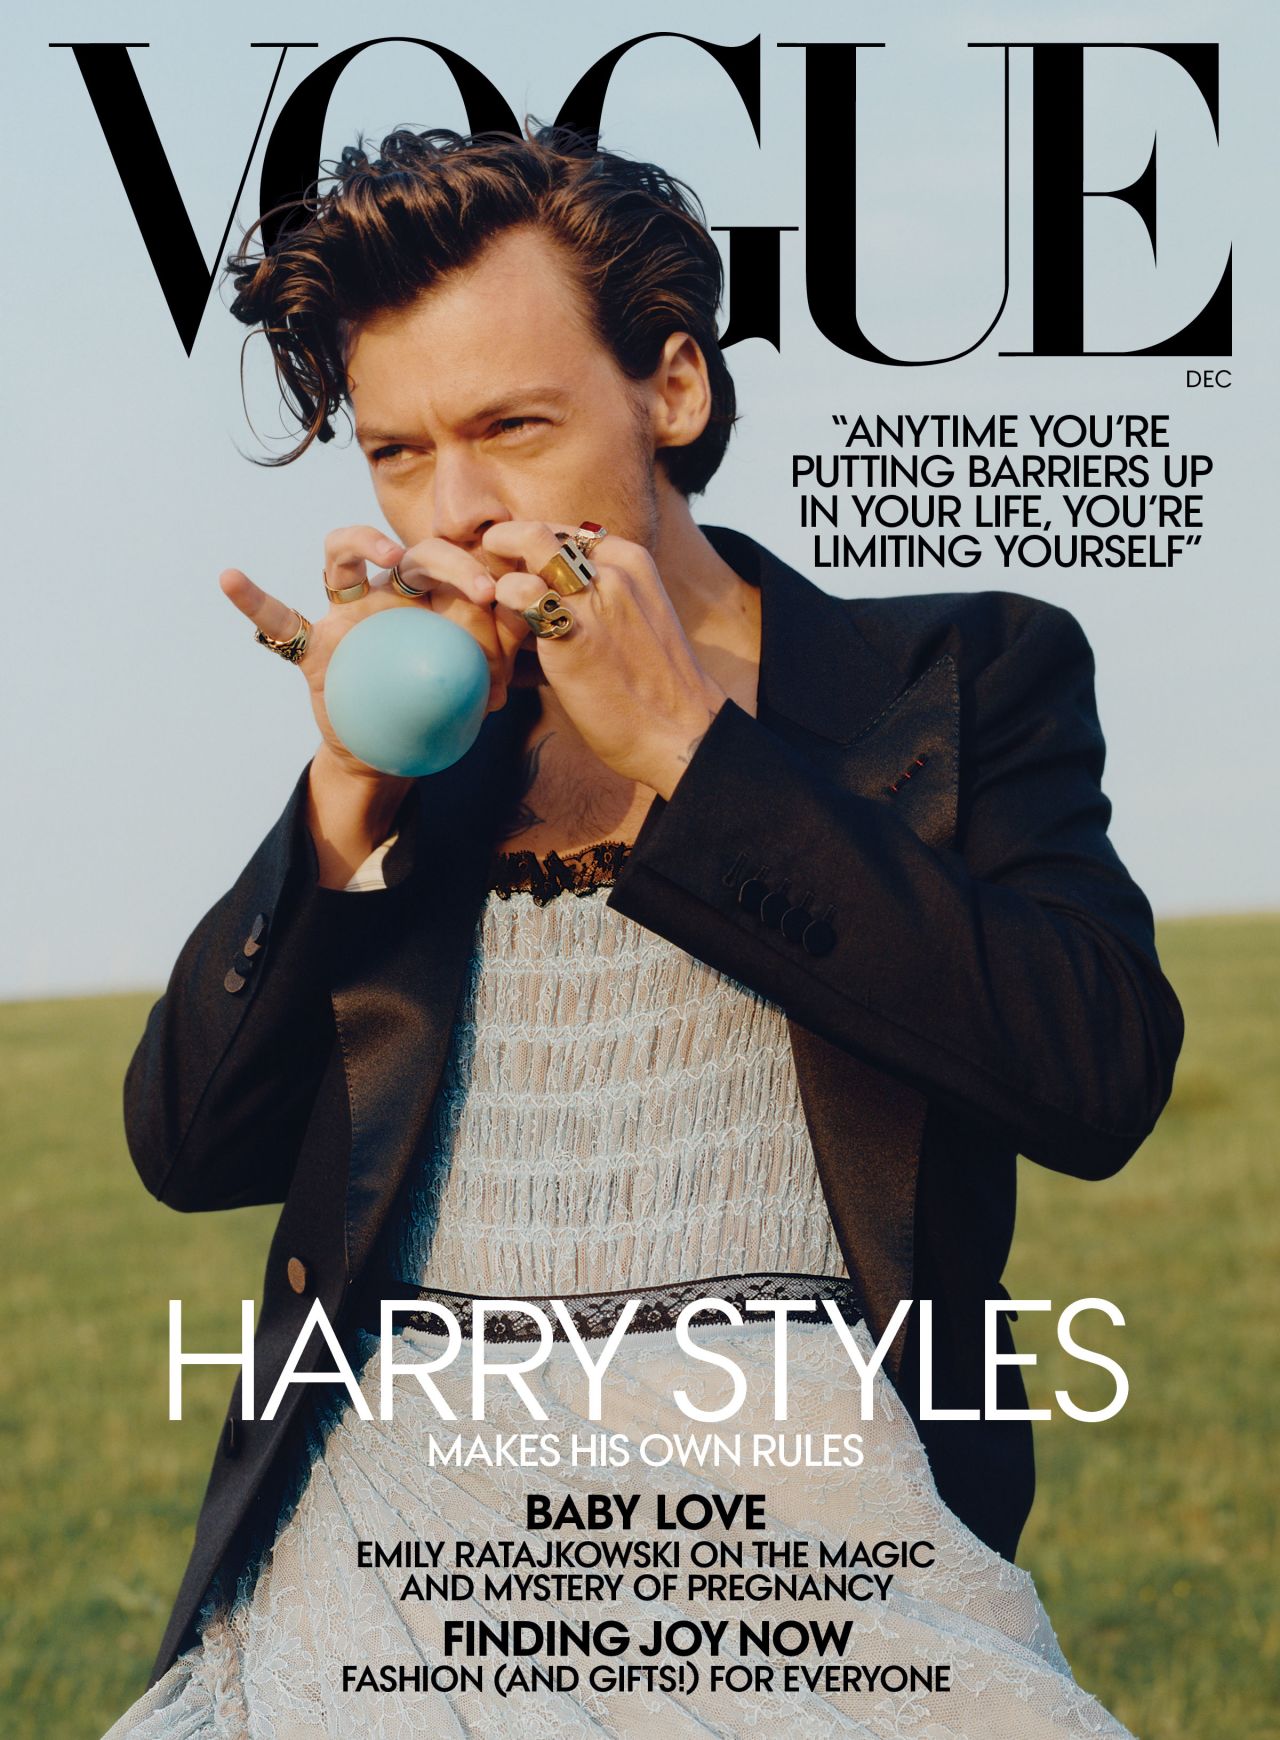 After he fronted the December issue of American Vogue in a full-length Gucci gown, Harry Styles was celebrated for challenging male stereotypes.